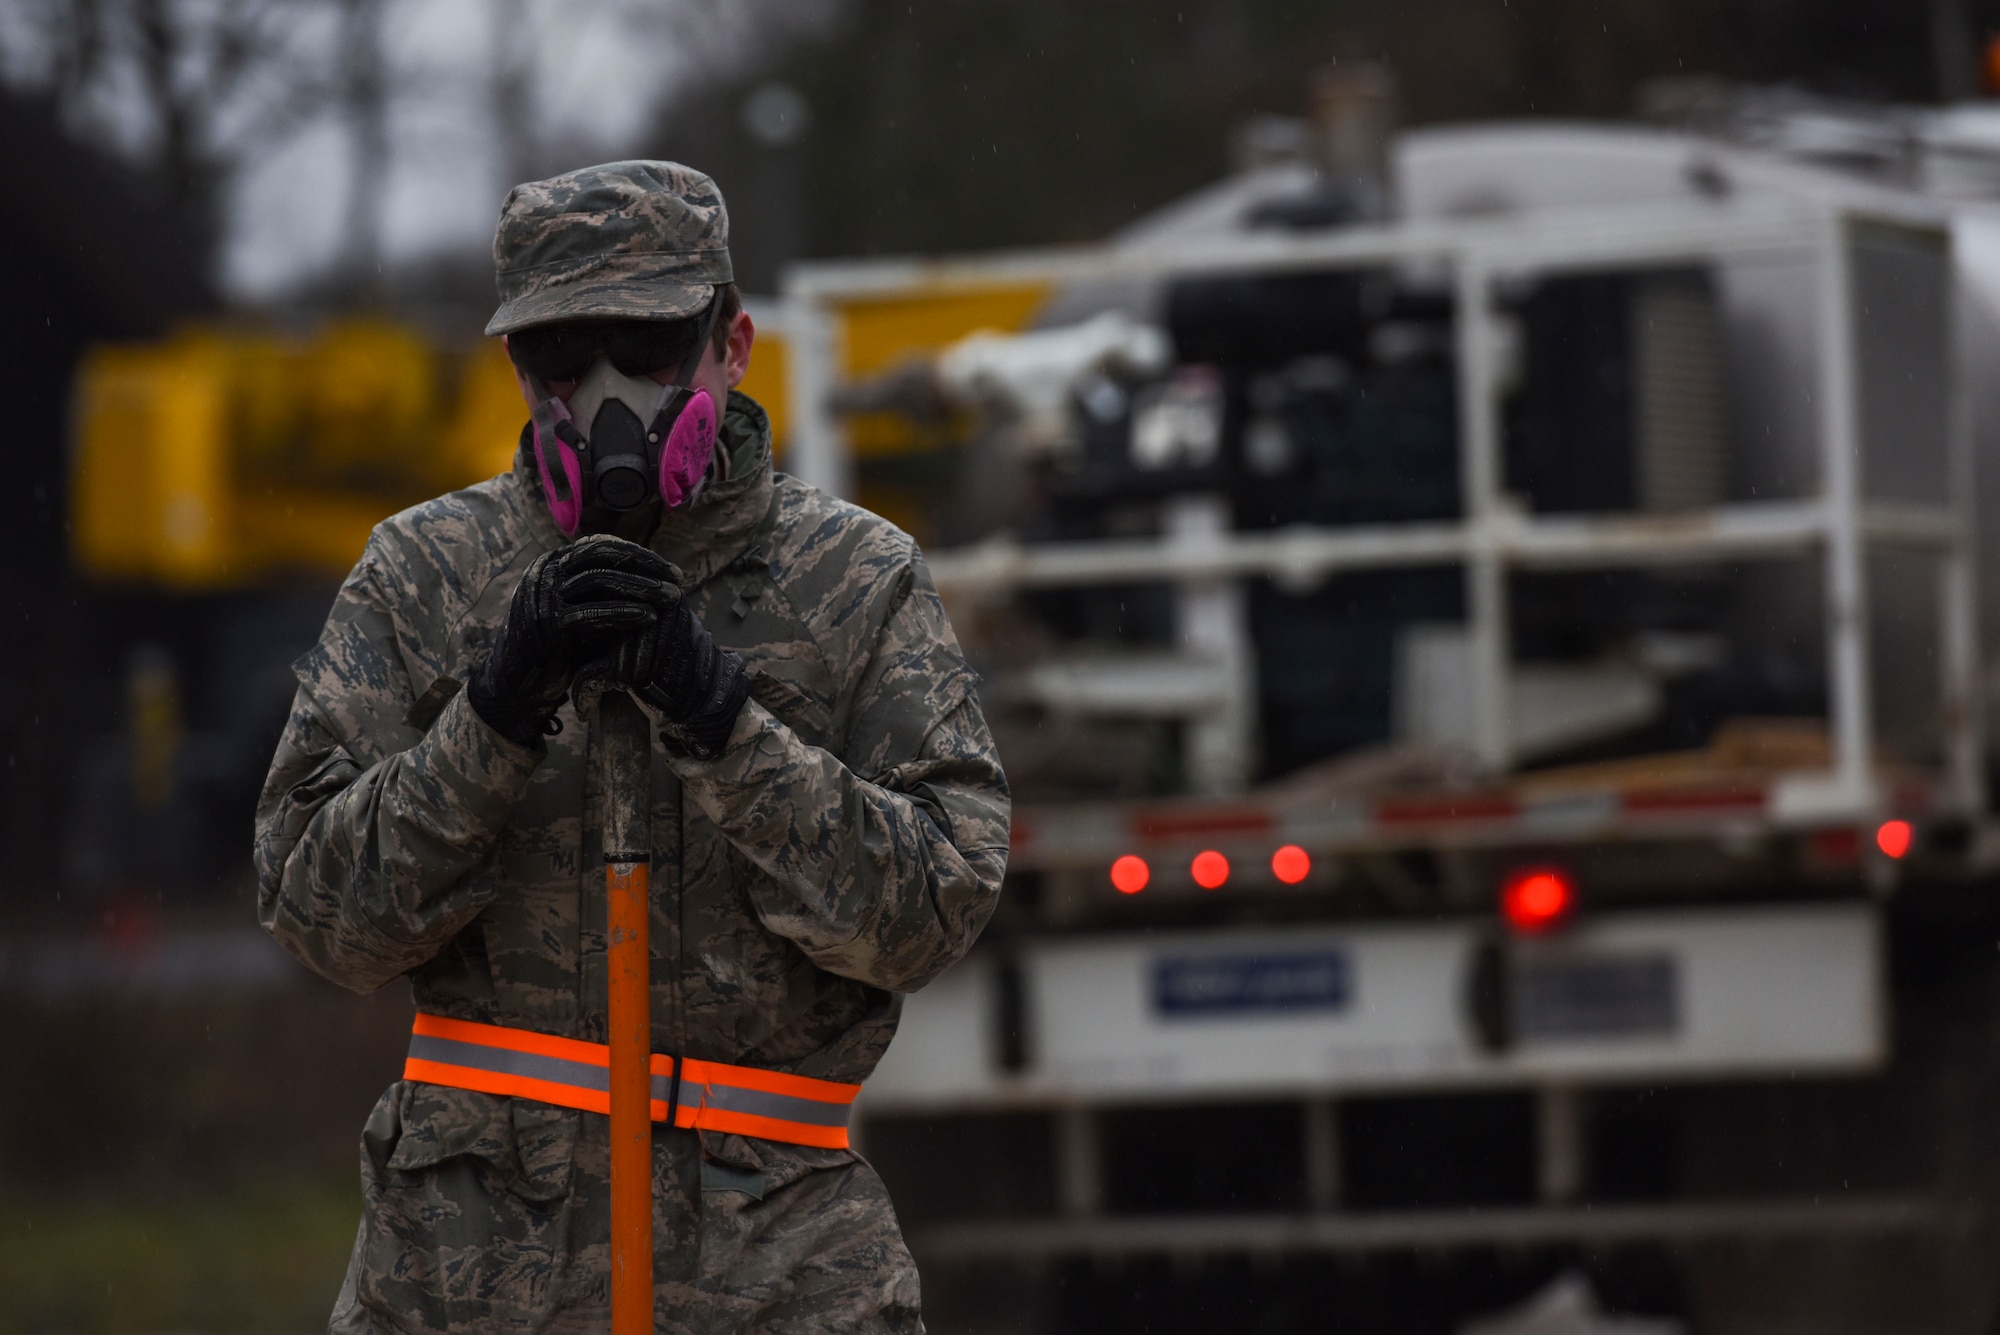 U.S. Air Force Senior Airman Jonathan Pike, 773rd Civil Engineer Squadron power production journeyman, rests during a Rapid Airfield Damage Repair training exercise on Ramstein Air Base, Germany, Jan. 25, 2018. The Airmen were tasked with filling six craters on a simulated runway. (U.S. Air Force photo by Senior Airman Devin M. Rumbaugh)